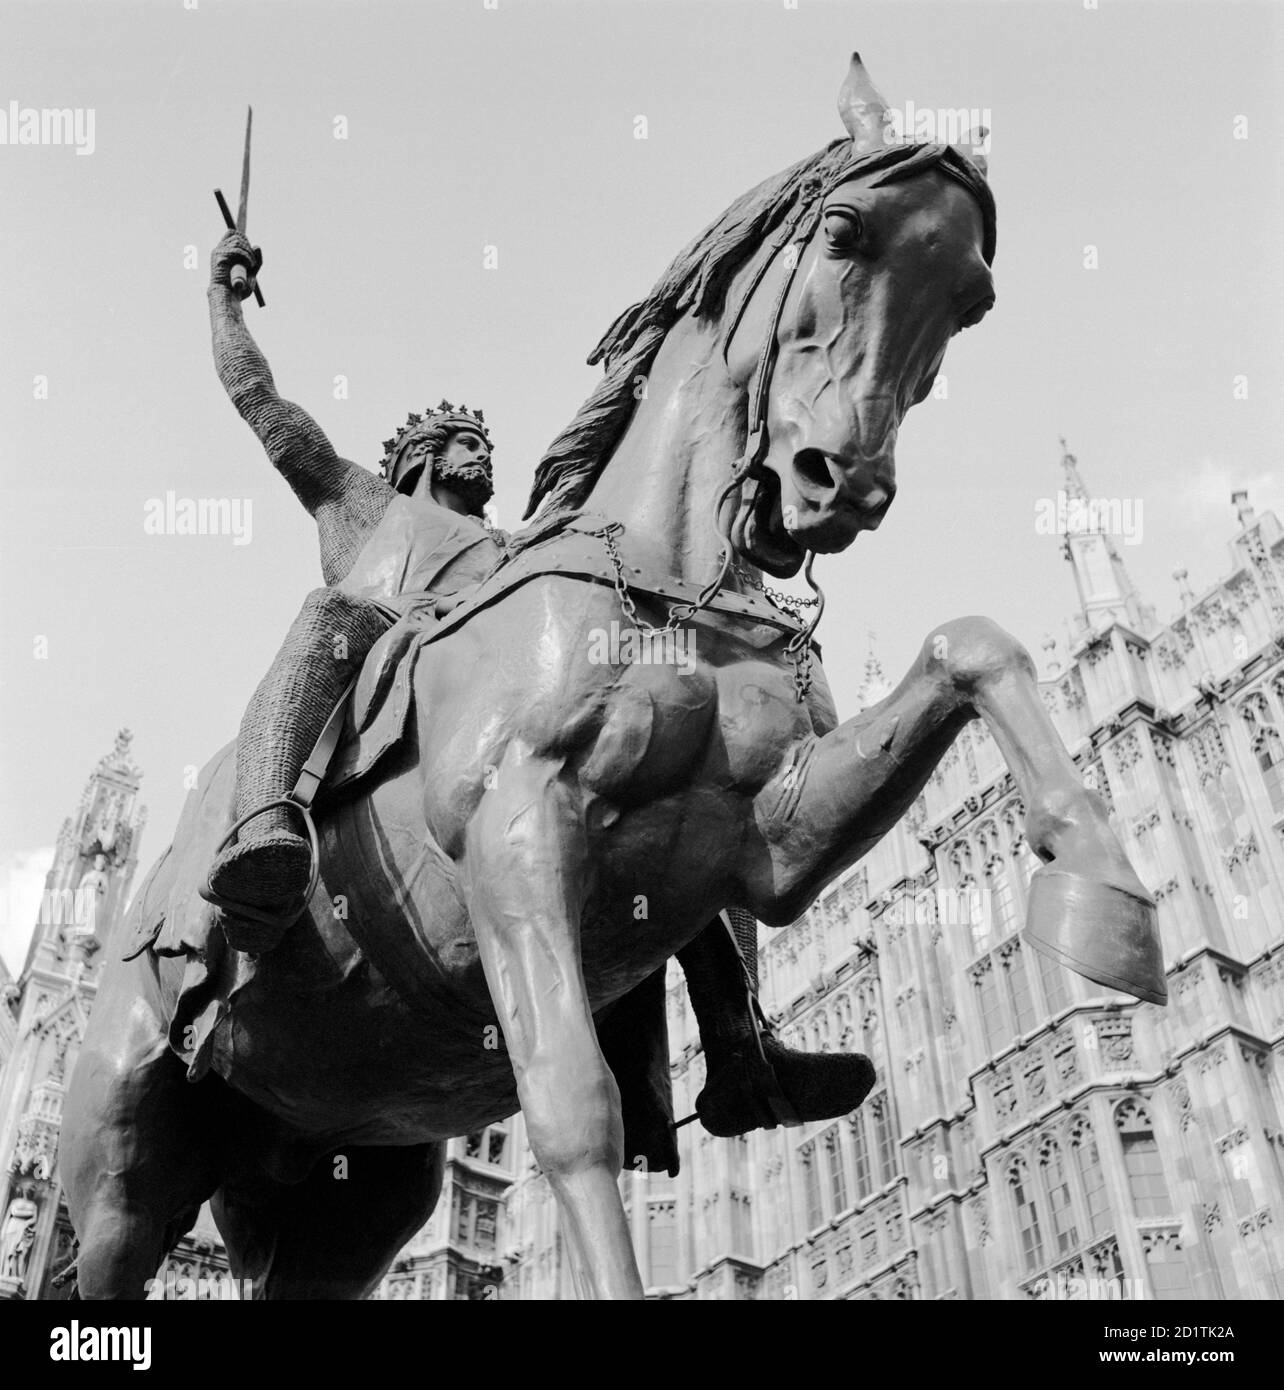 OLD PALACE YARD, Westminster, London. Detail view of the Richard Coeur de Lion statue looking up towards the equestrian bronze figure. It was made in 1860 by Carlo Marochetti. Photographed by Eric de Mare. Date range: 1945-1980. Stock Photo